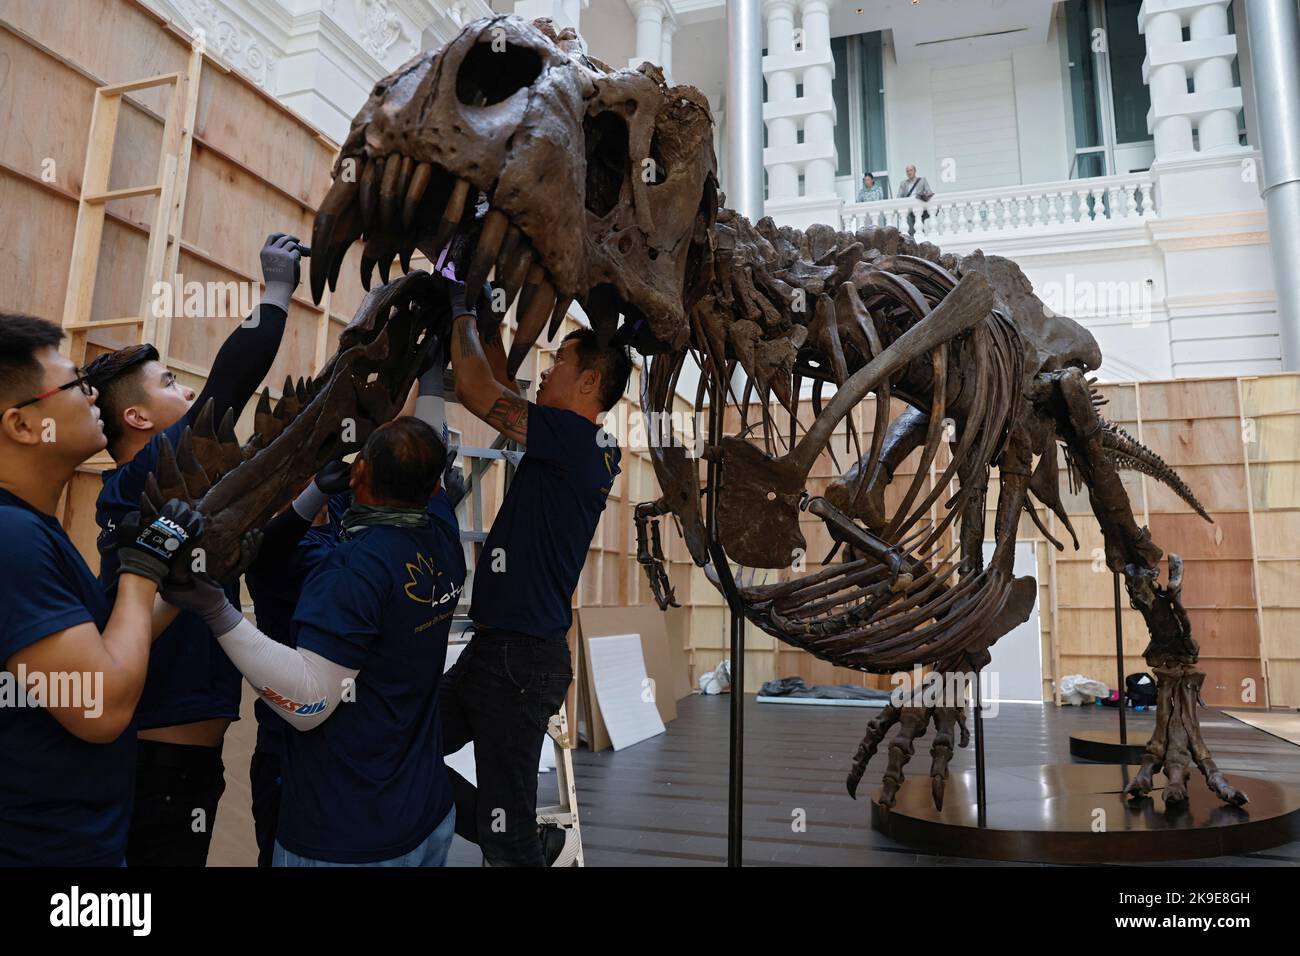 Shen the T. rex, a 1.4 tonne Tyrannosaurus Rex dinosaur skeleton that is being offered for auction by Christie's, is assembled for display at the Victoria Theatre & Concert Hall in Singapore October 27, 2022. REUTERS/Edgar Su Stock Photo